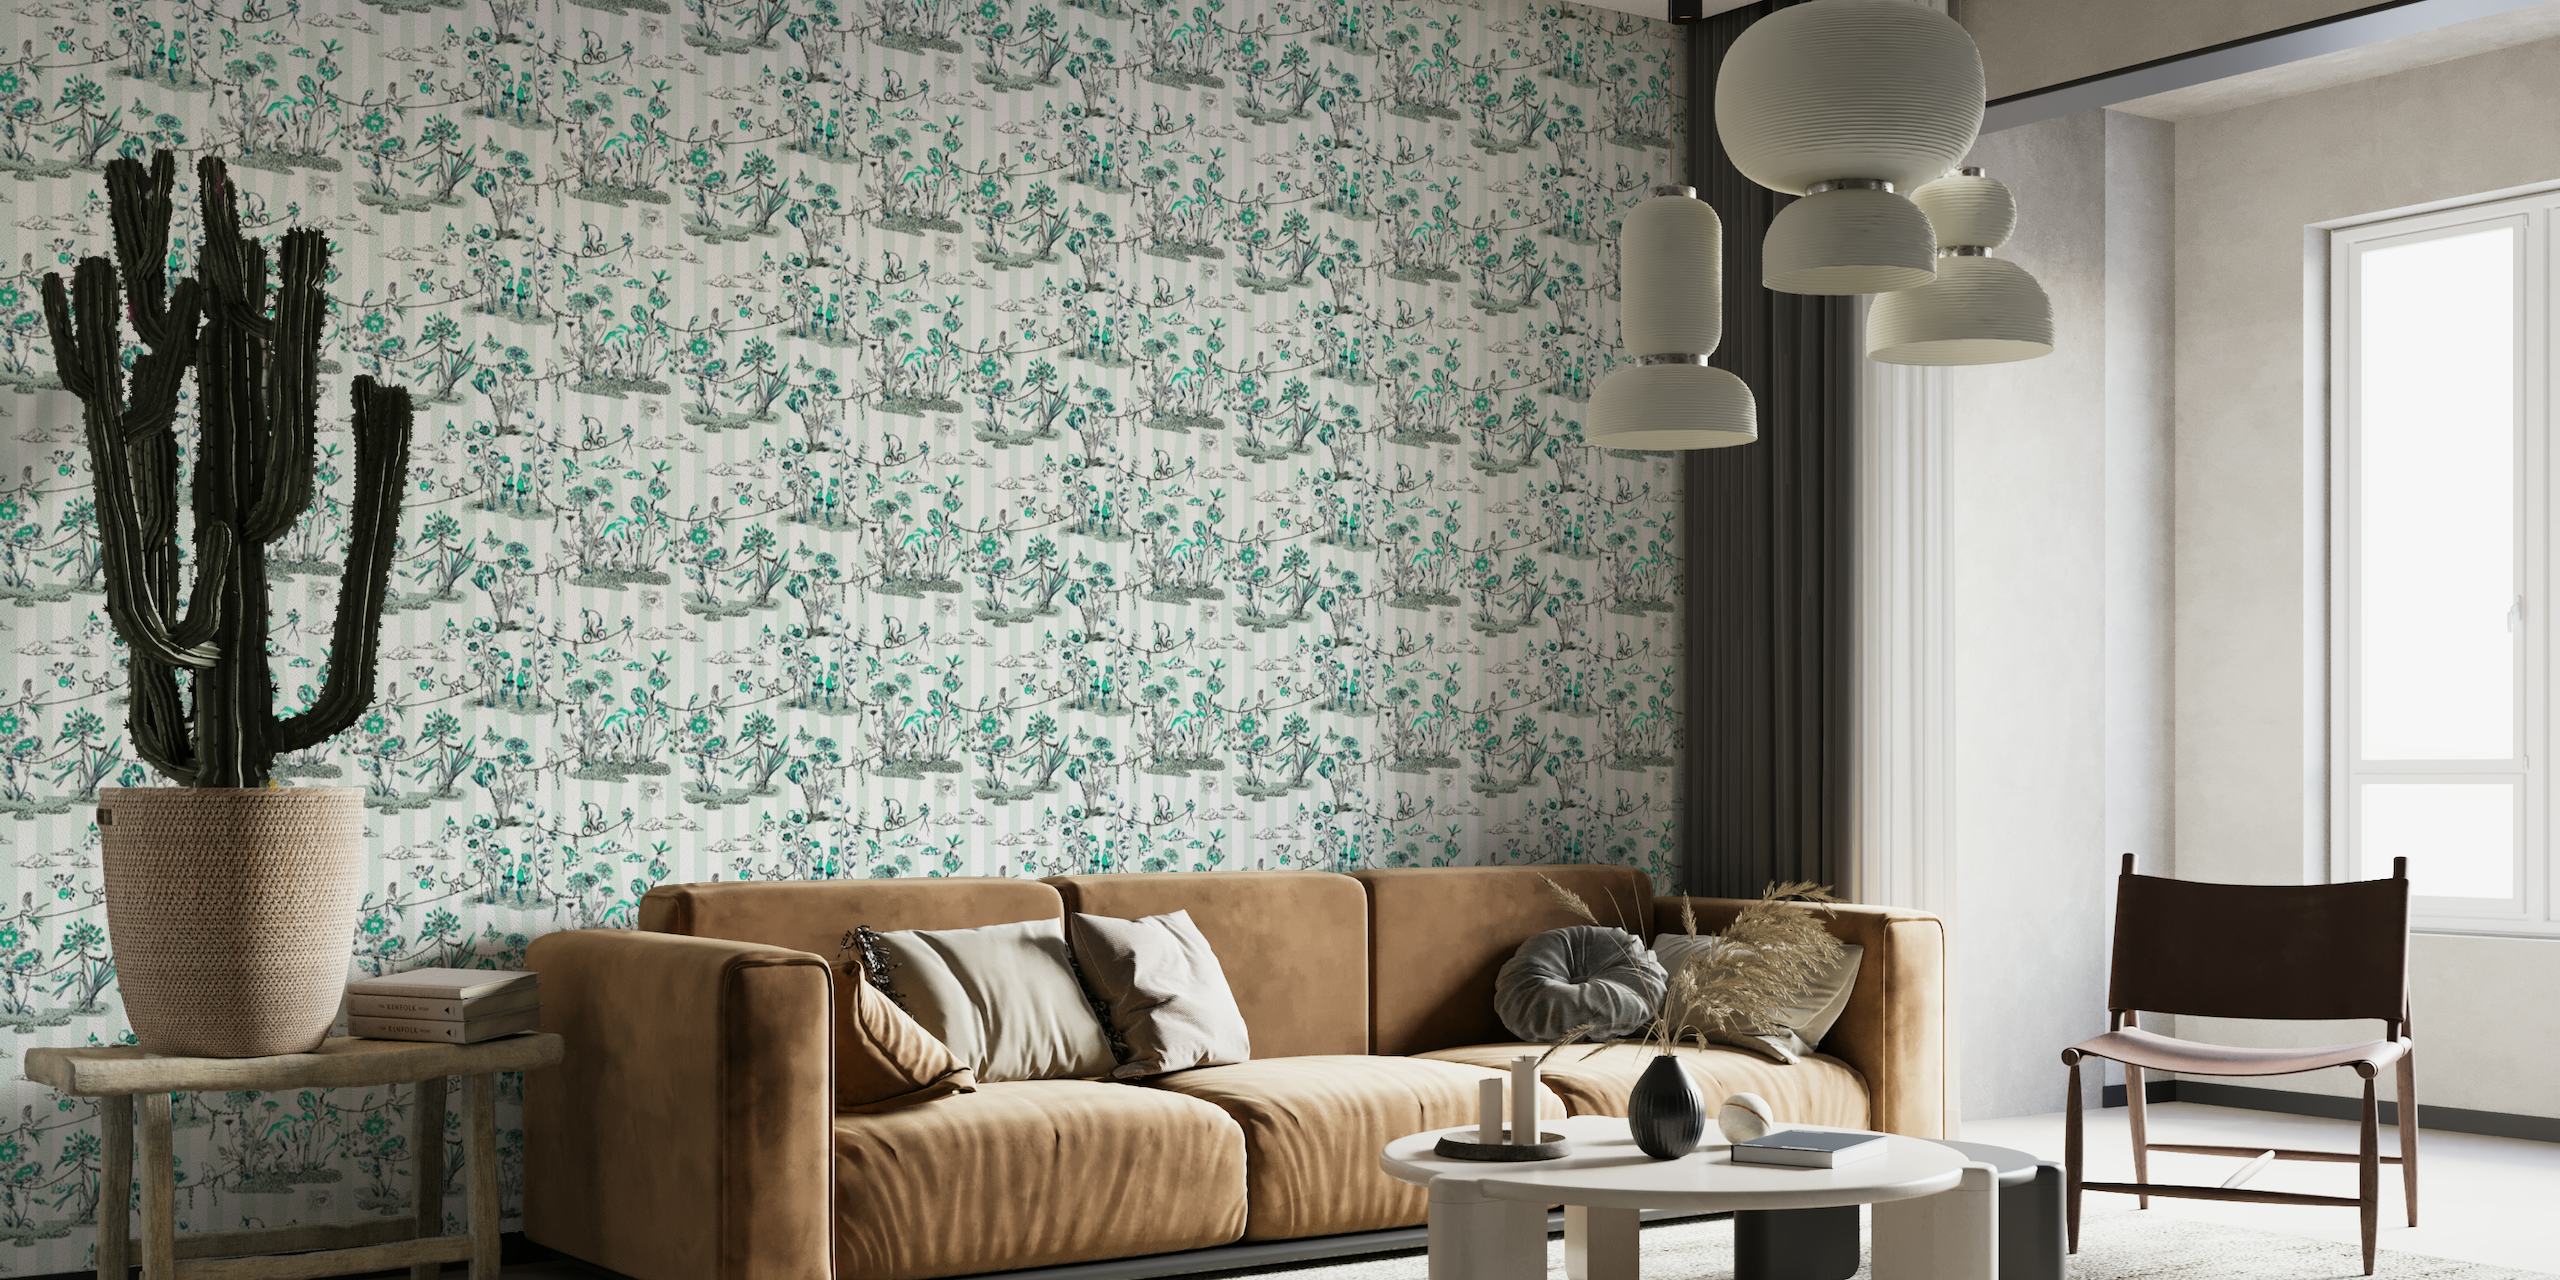 Whimsical Jungel Party water blue turquoise - S wallpaper